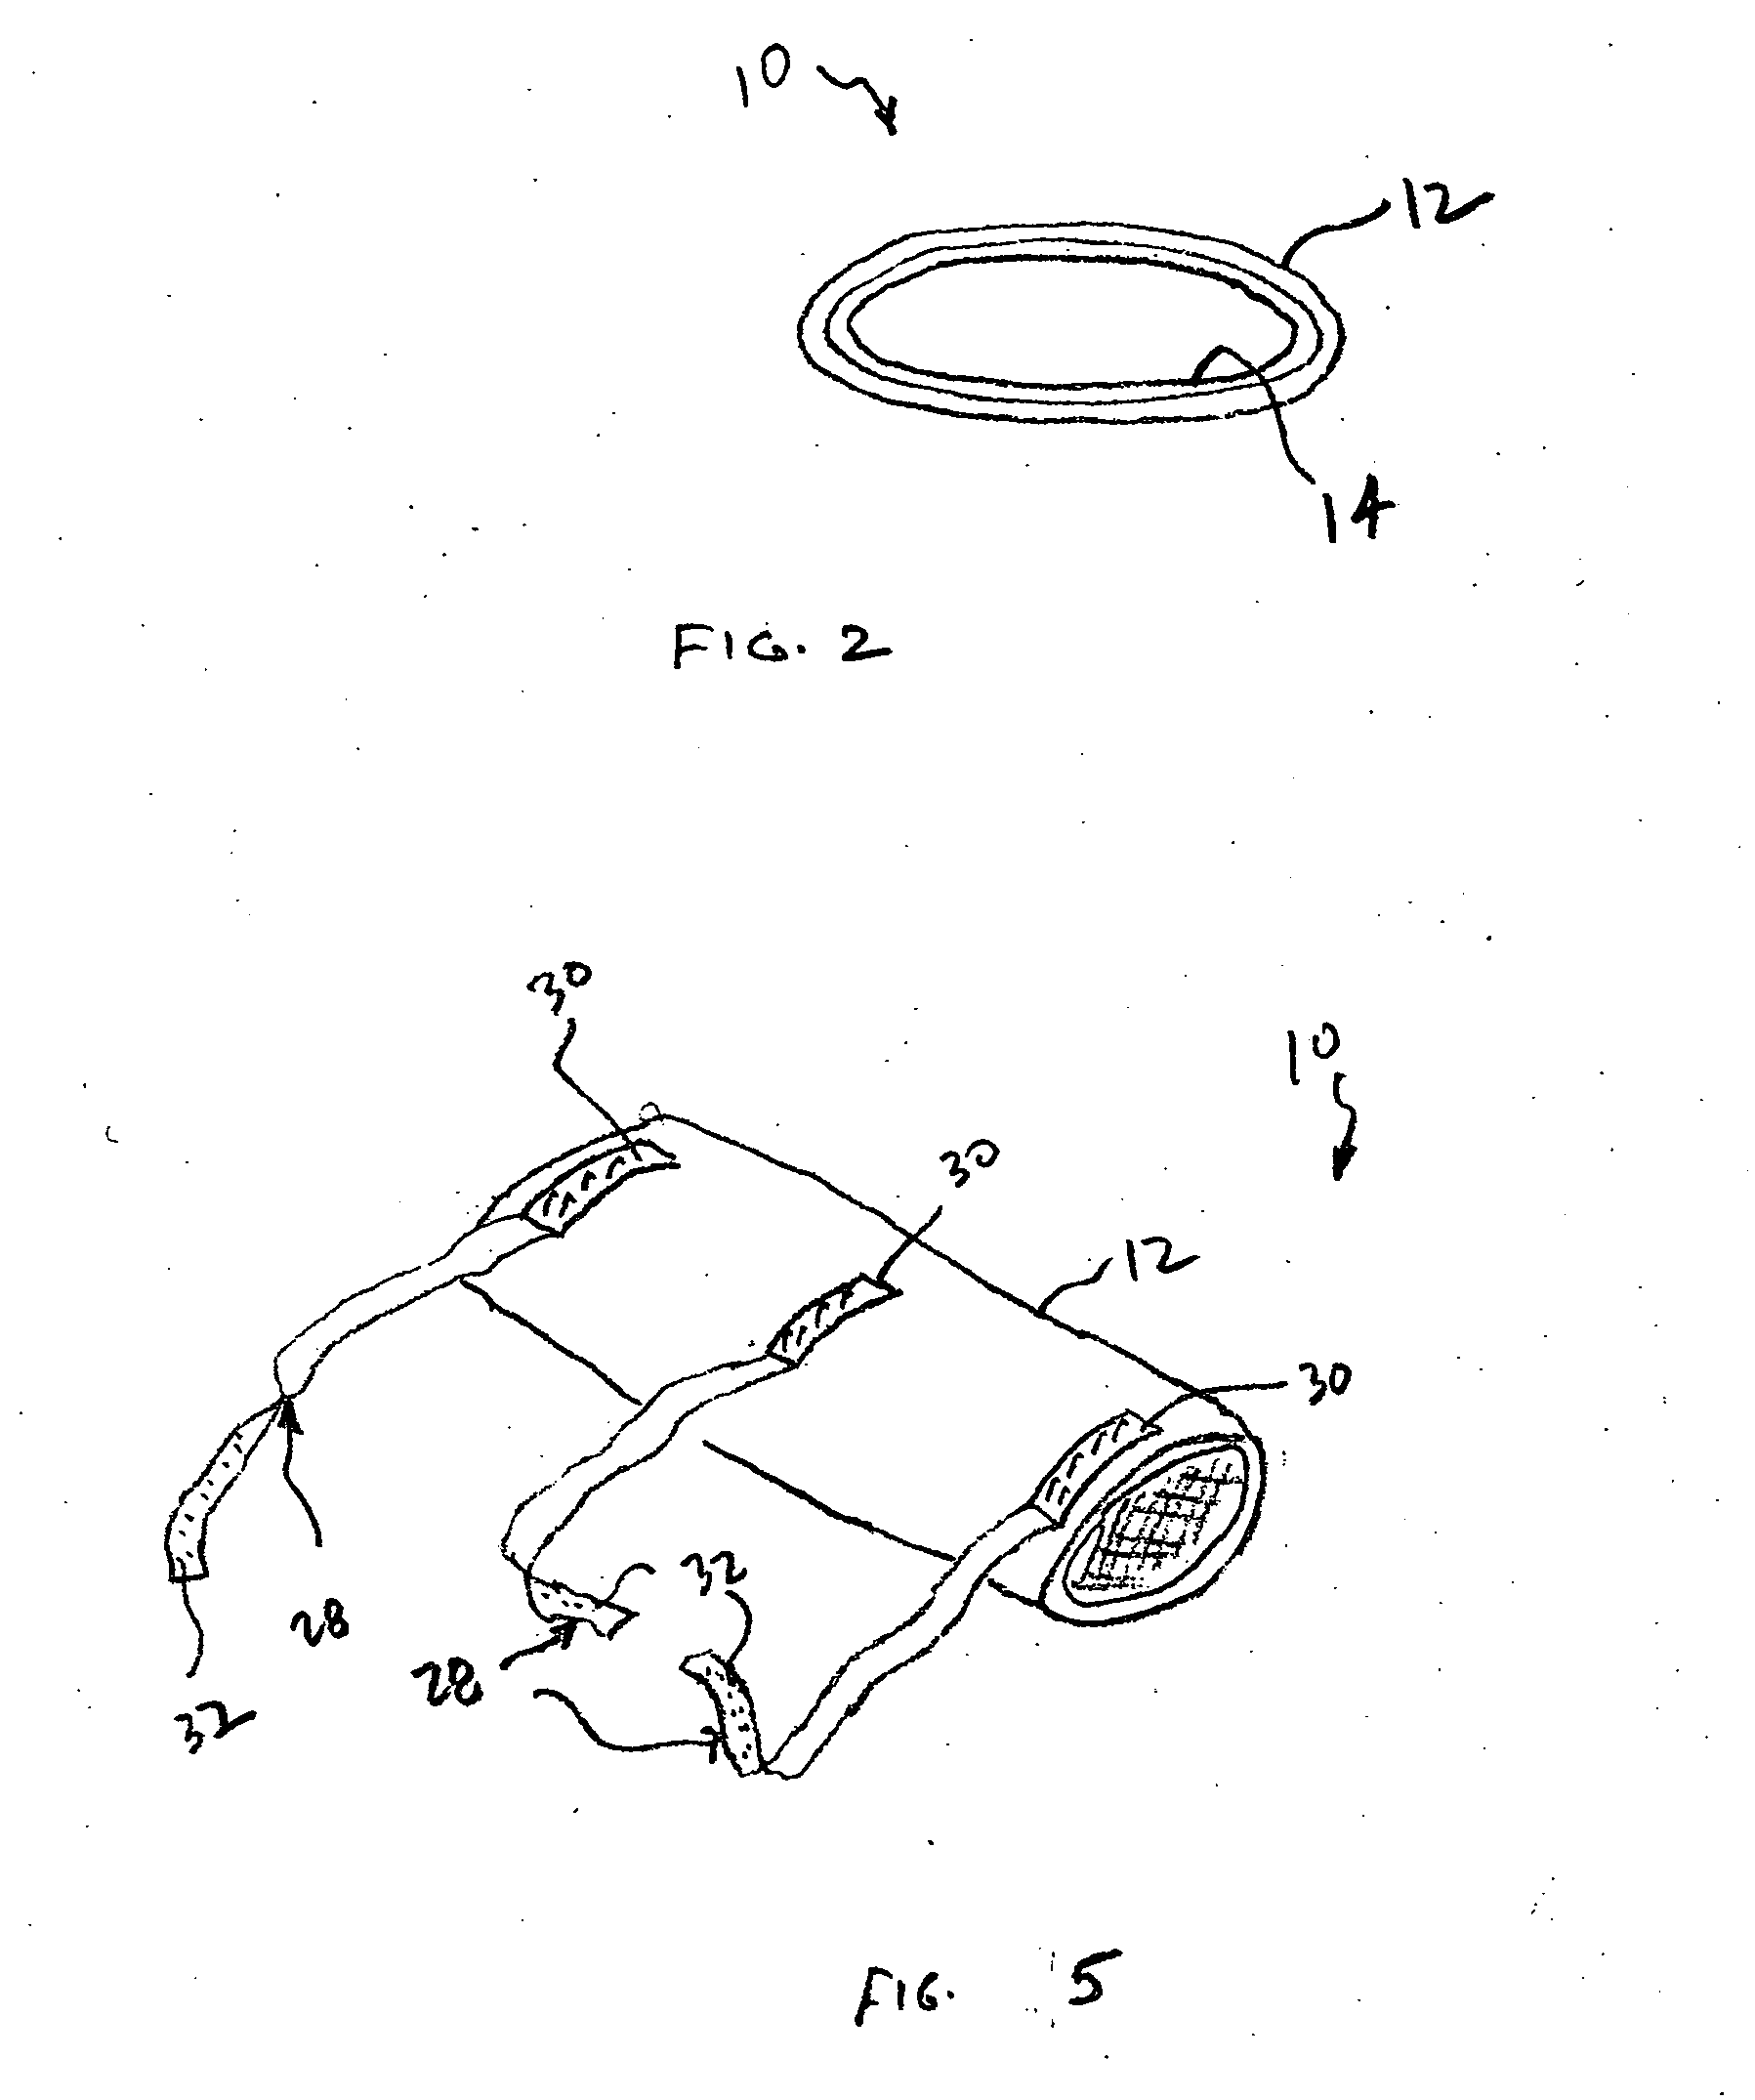 Device for the delivery of blood clotting materials to a wound site